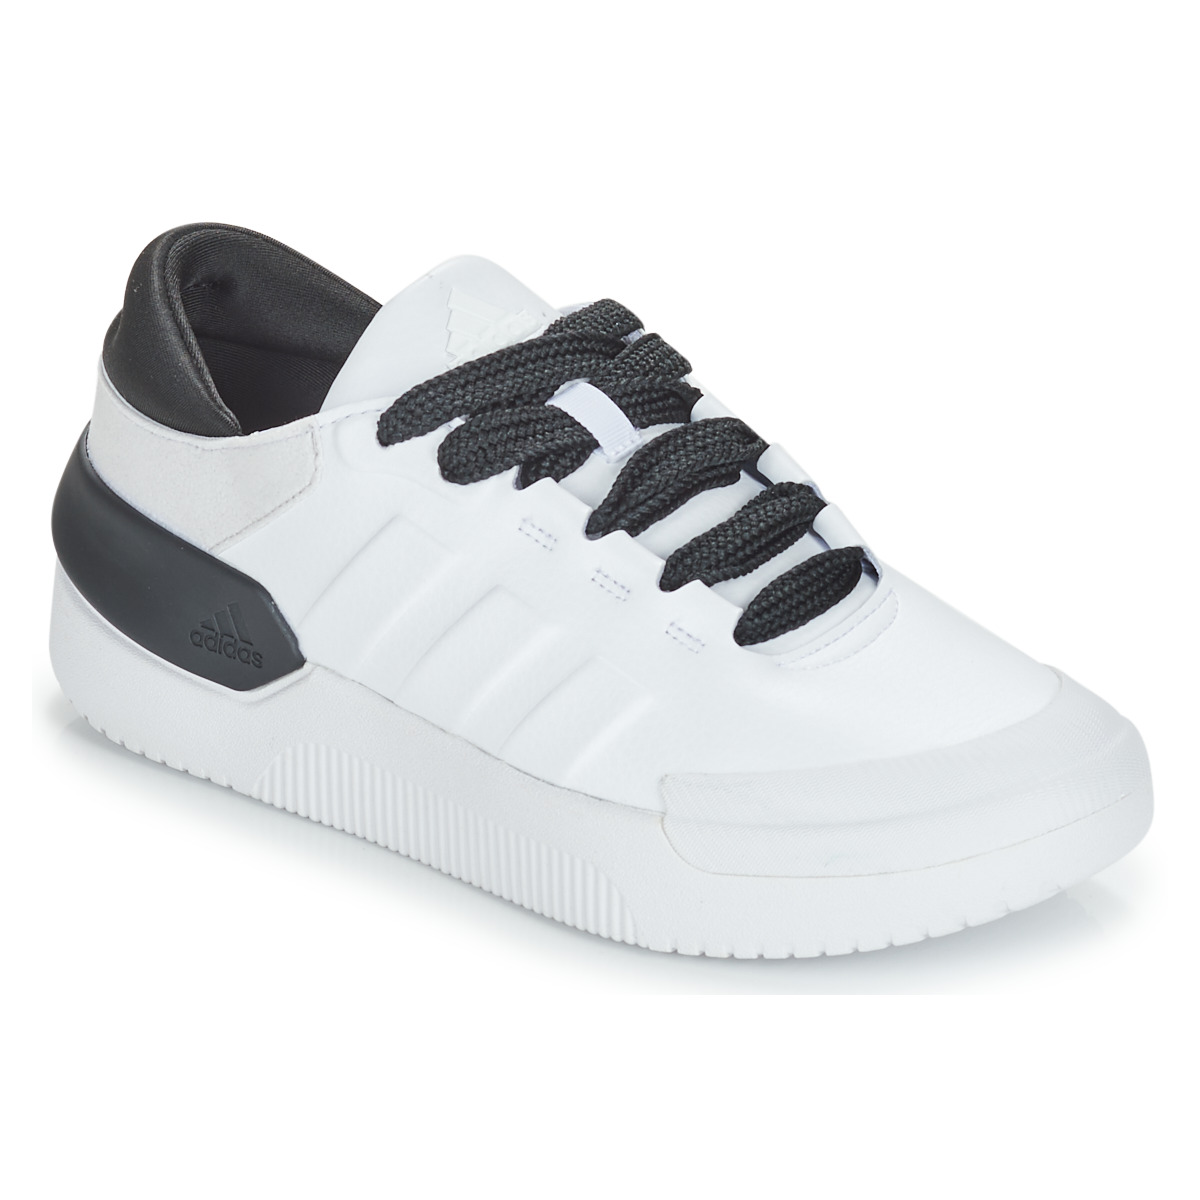 Xαμηλά Sneakers adidas COURT FUNK